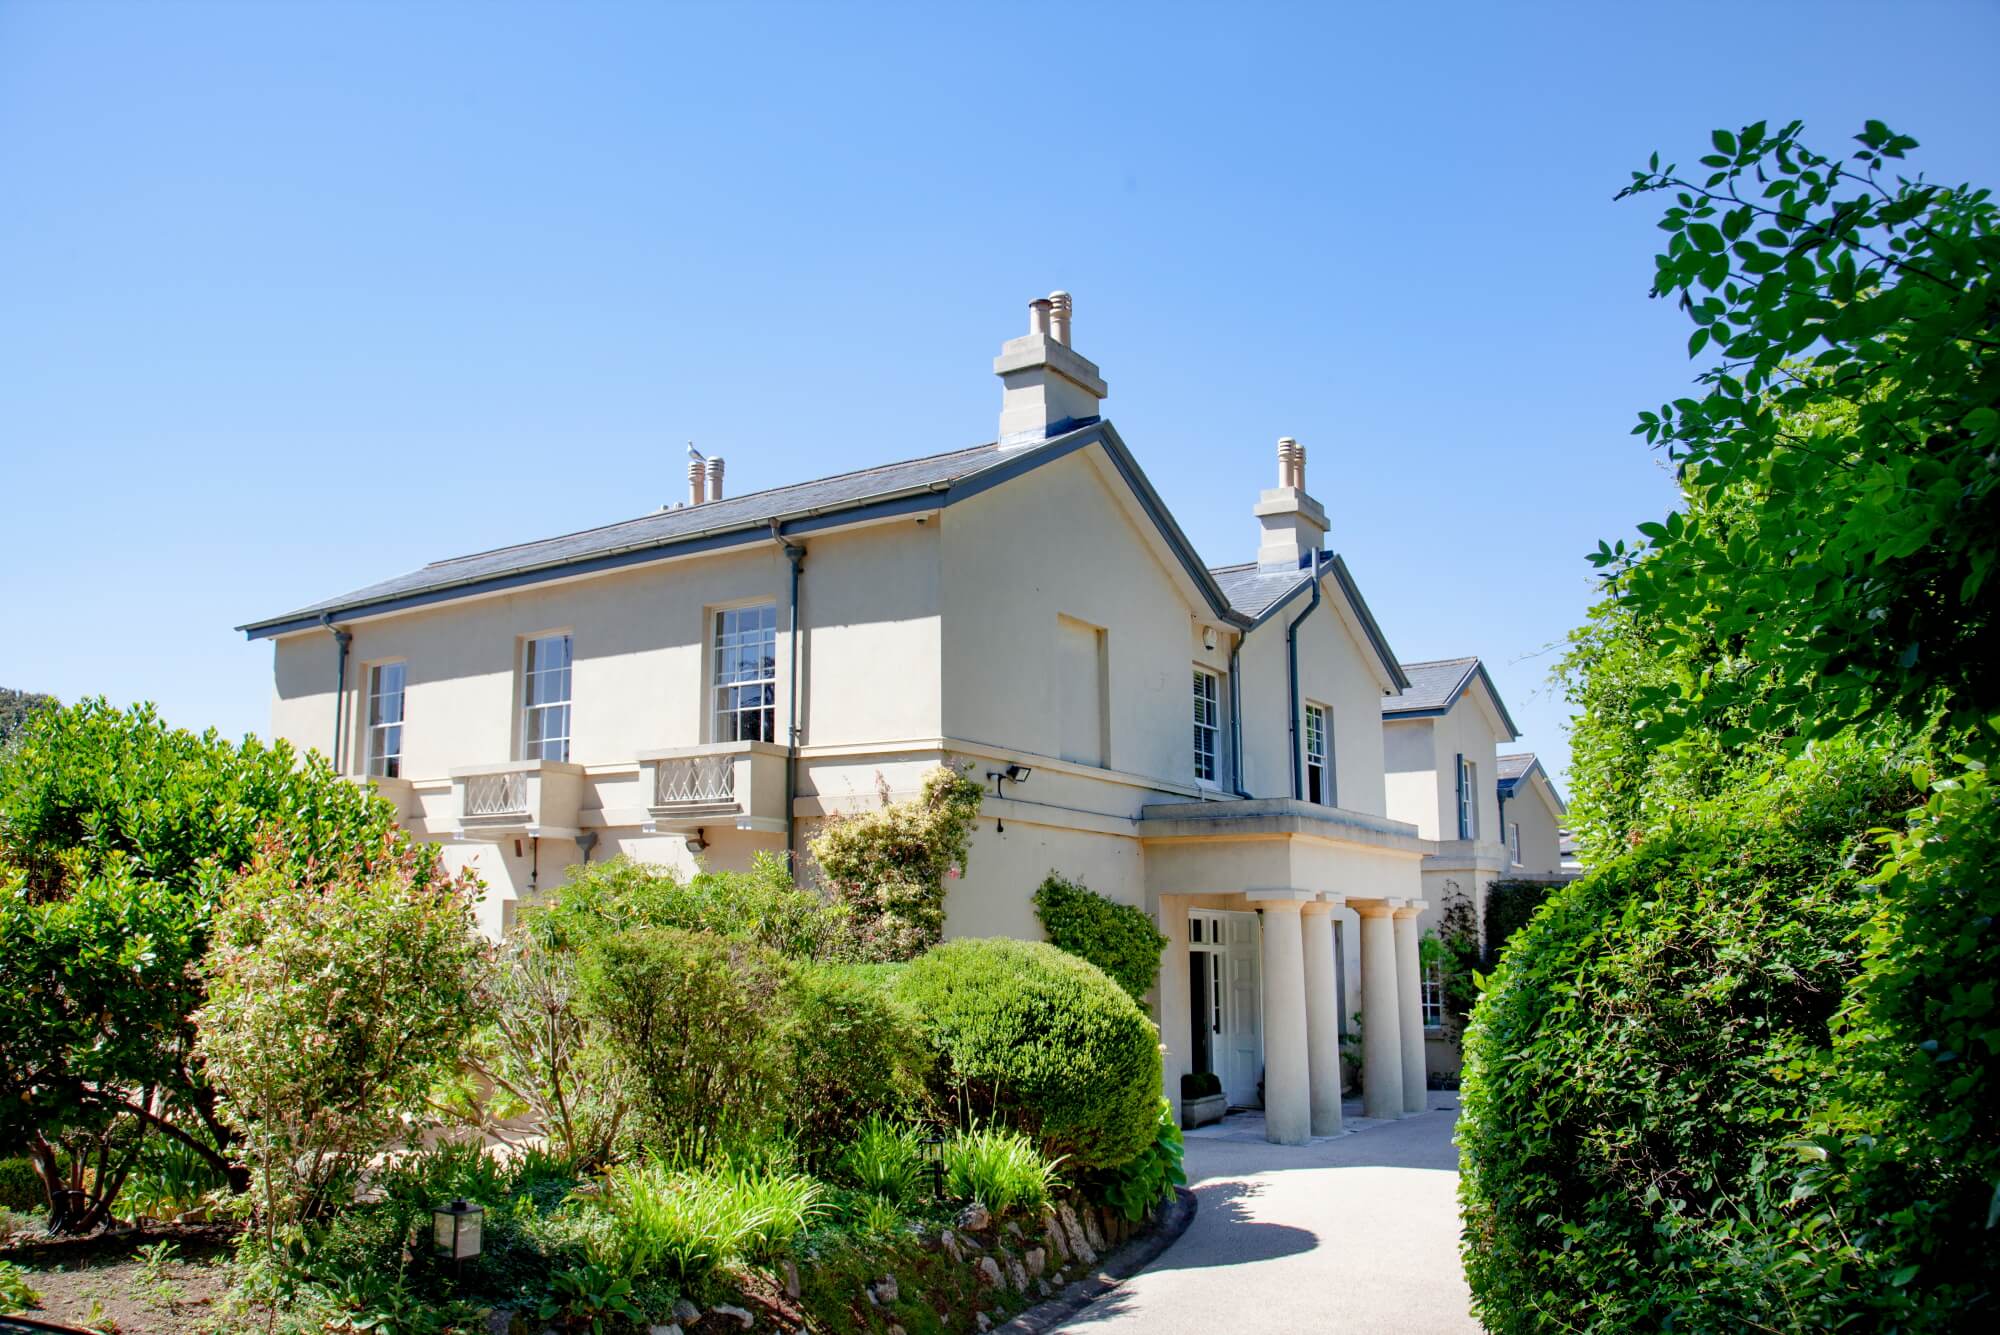 St Anne's Manor in Torquay - Luxury self catering holiday accommodation for larger family groups.